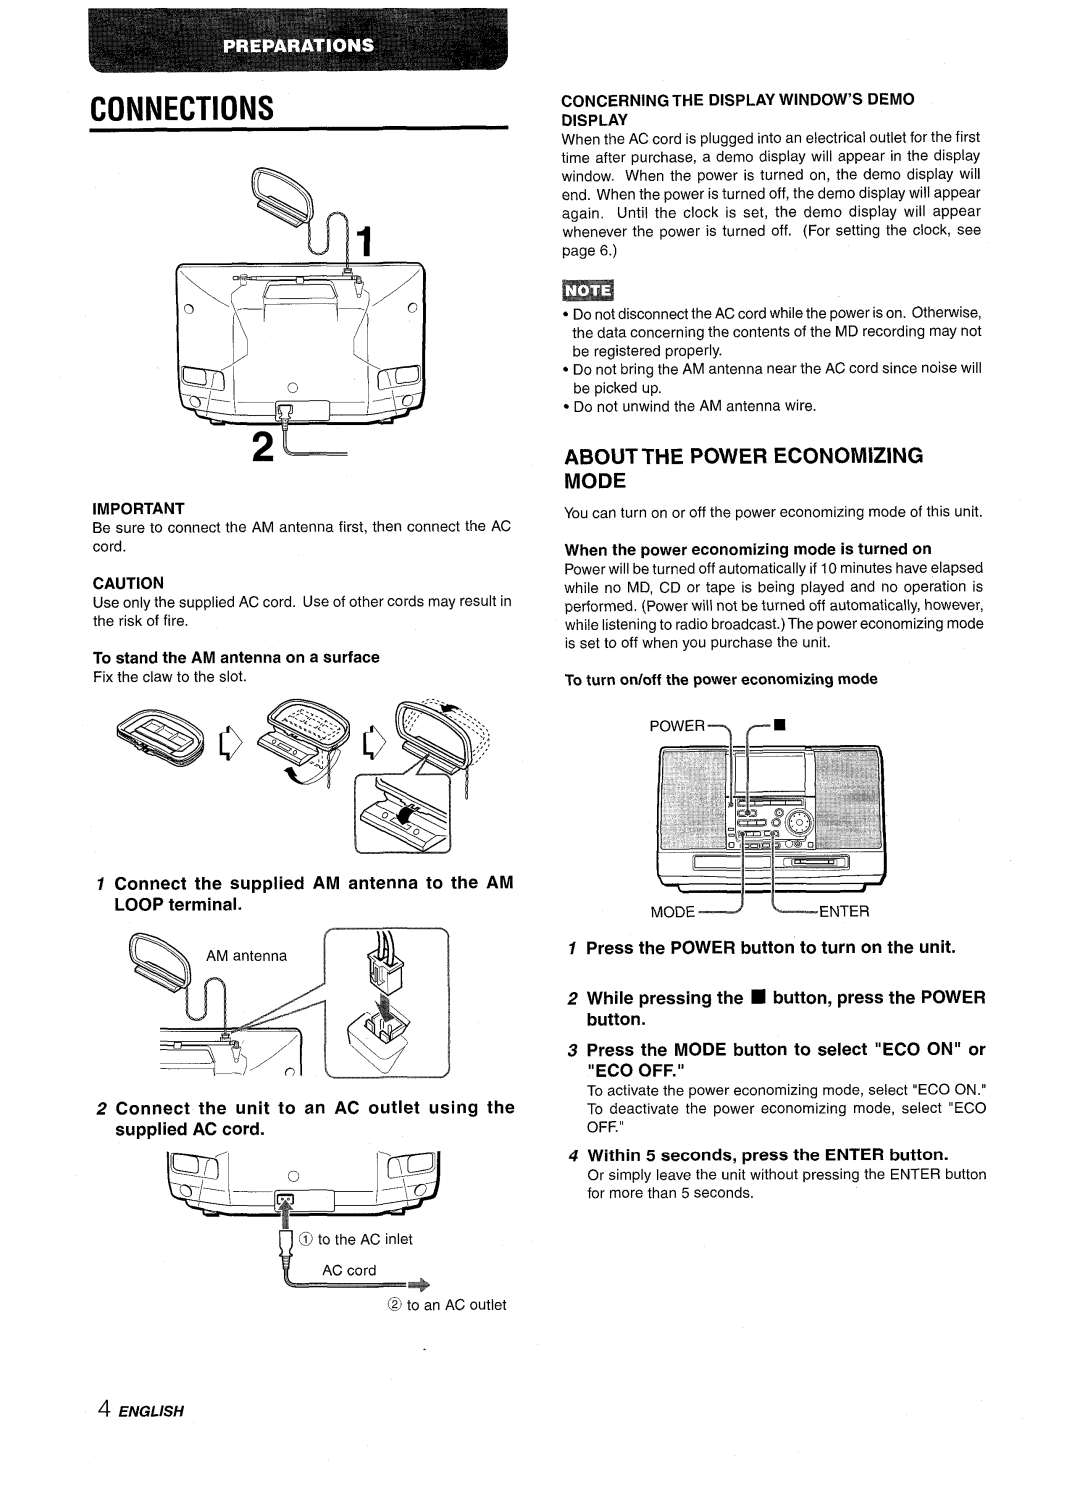 Aiwa CSD-MD50 manual Connections, About The Power Economizing Mode, To stand the AM antenna on a surface, English 